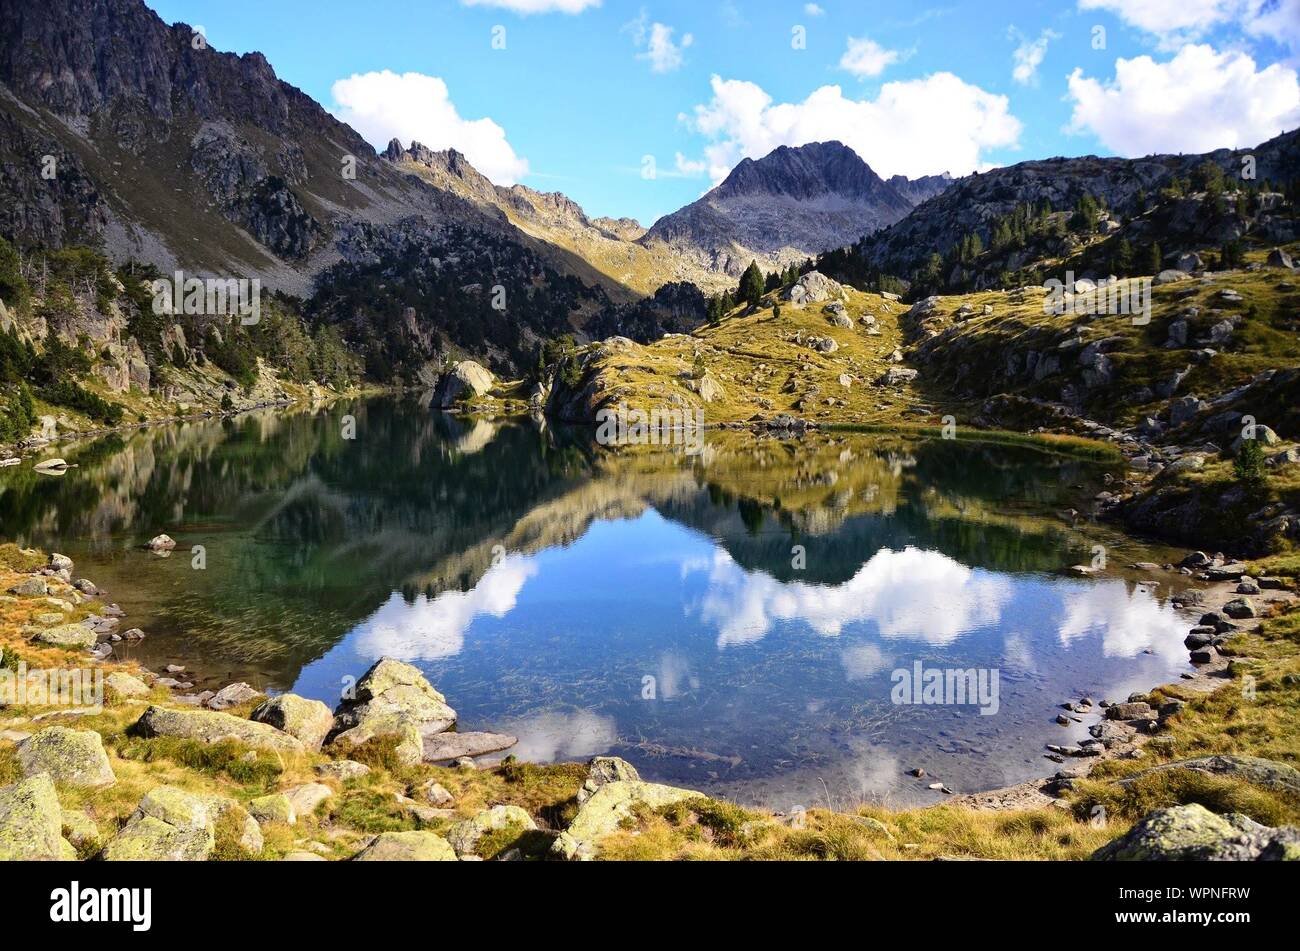 Scenic View Of Lake Nestled In Mountains Against Cloudy Sky Stock Photo